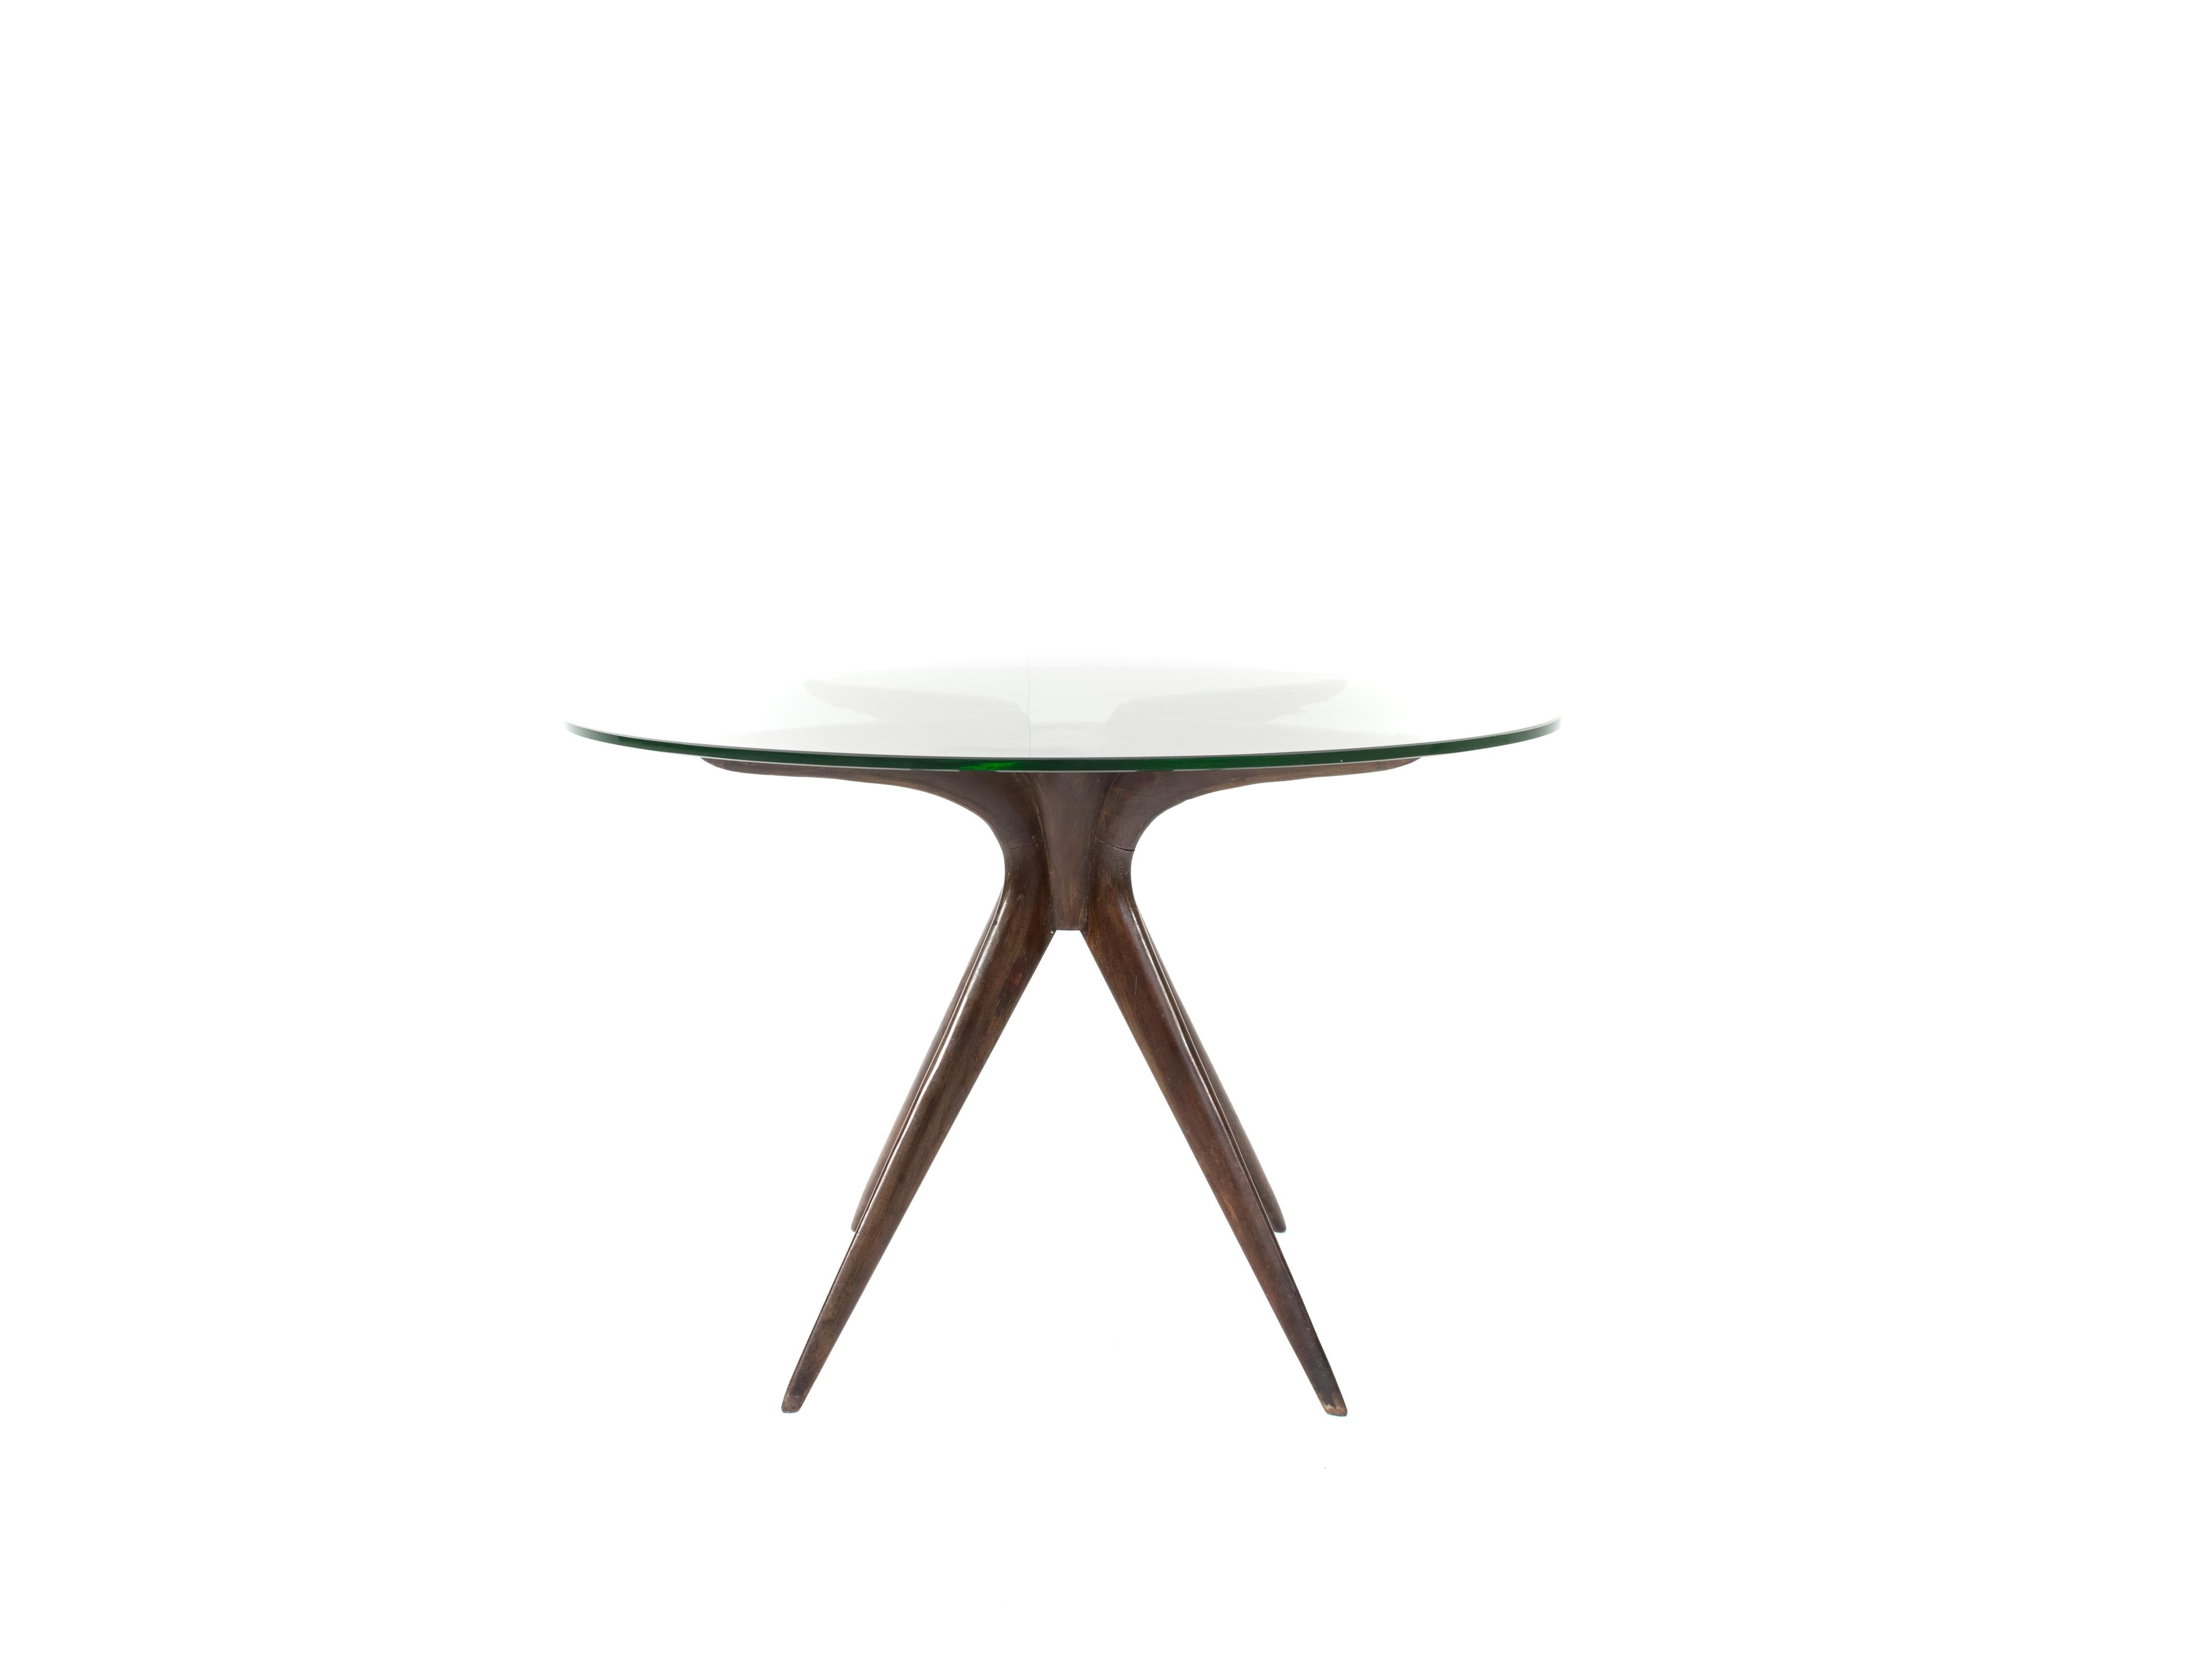 Amazing coffee table in wood and glass attributed to Ico Parisi, Italy, 1950s. This coffee table has a four-legged base. These legs are also used to hold the round glass top. In the middle of the table is a circle to hold the legs together. The